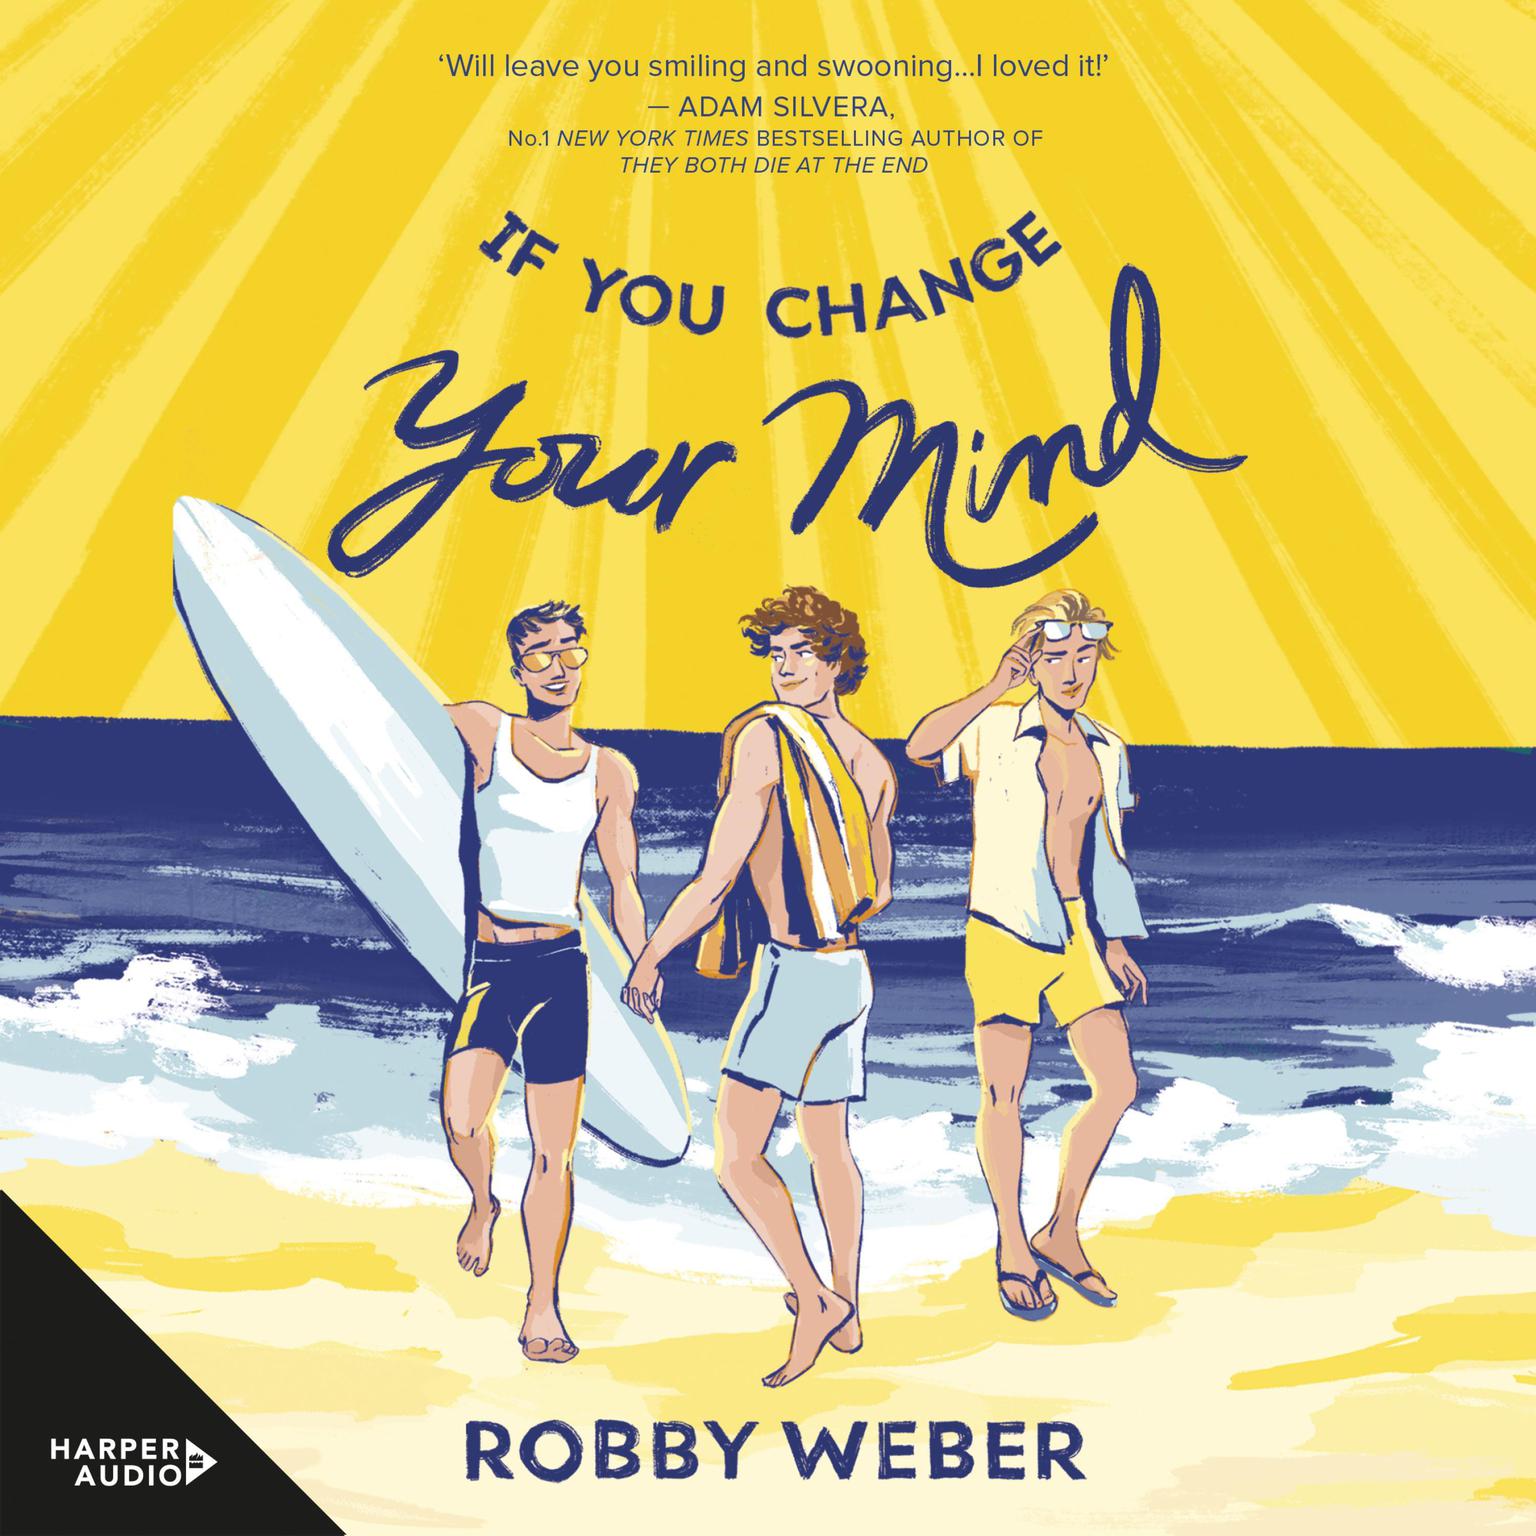 If You Change Your Mind Audiobook, by Robby Weber